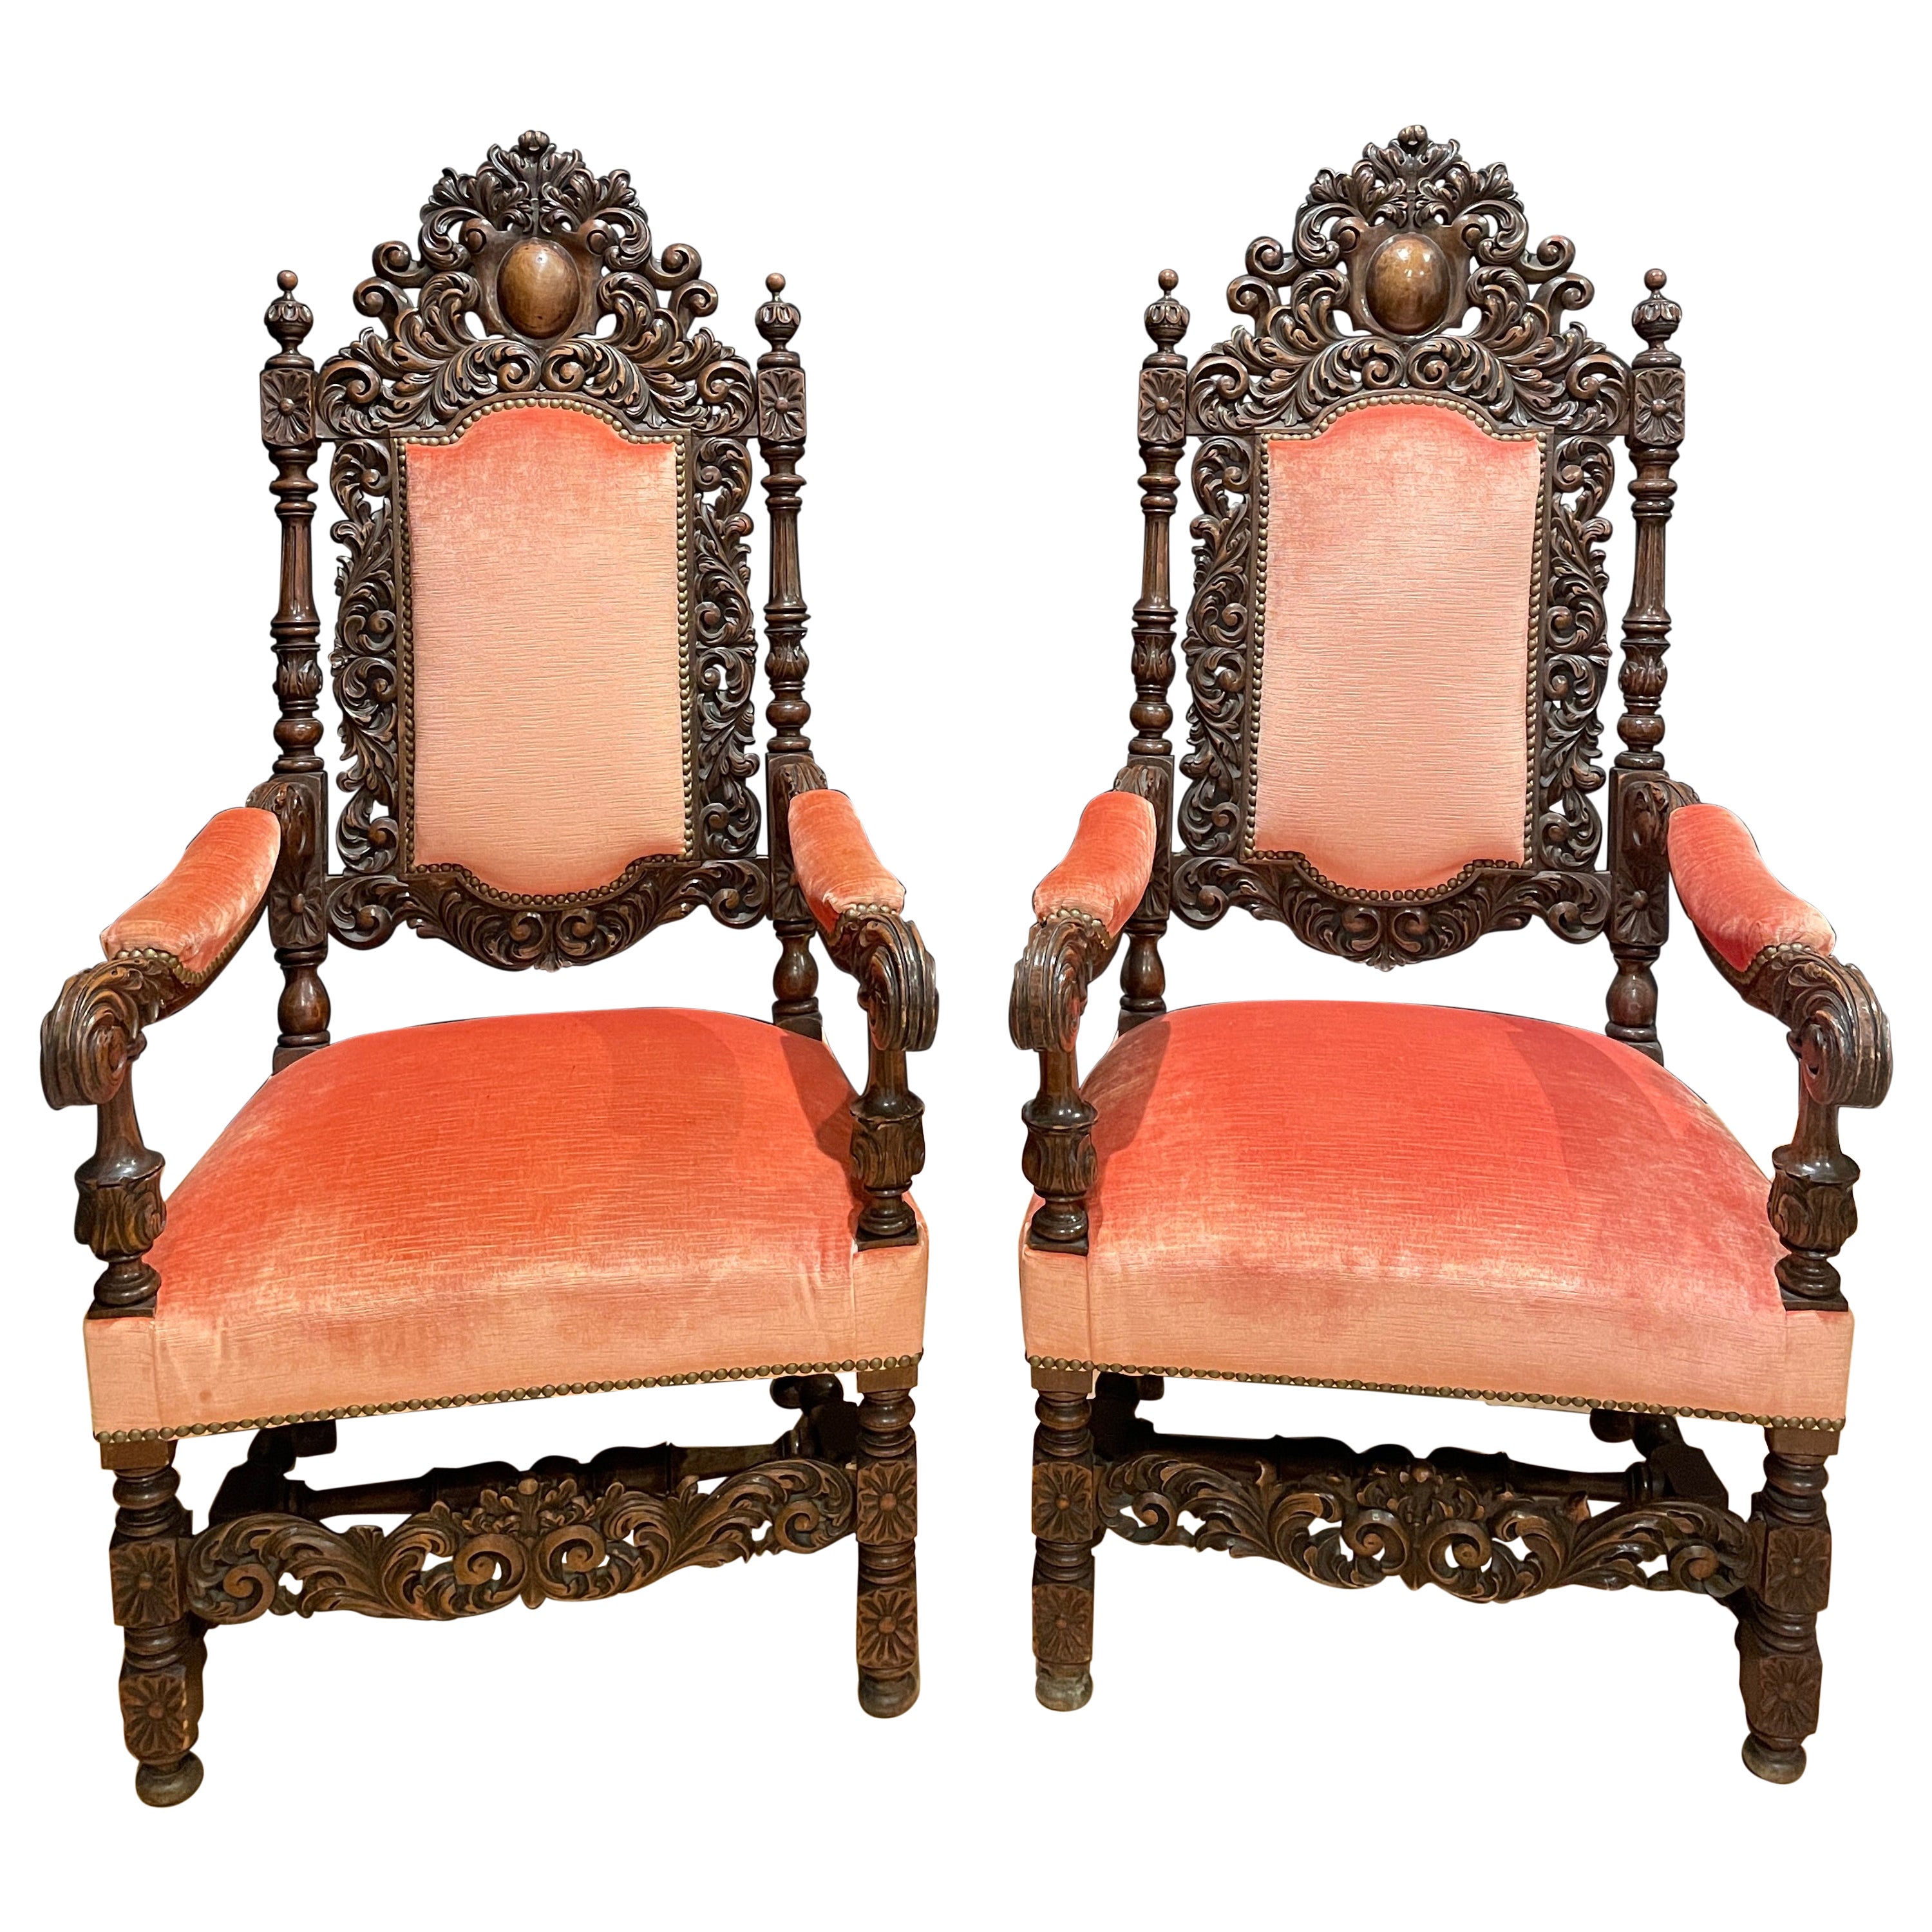 Antique Pair of Carved Walnut Rococo Throne Chairs